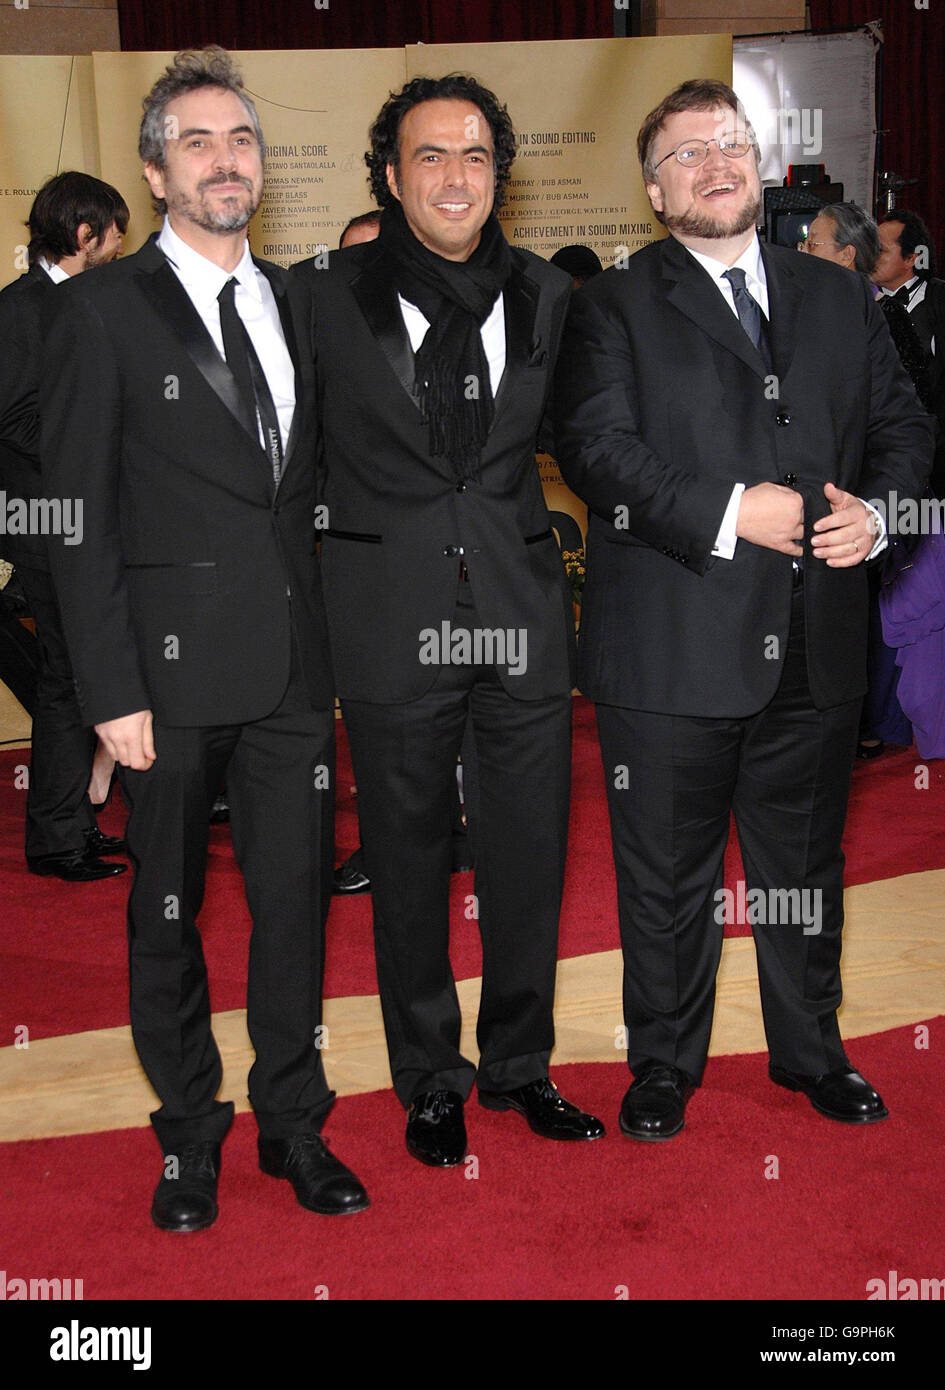 (From left to right) Alfonso Cuaron, Alejandro Gonzalez Inarritu and Guillermo del Toro arrives for the 79th Academy Awards (Oscars) at the Kodak Theatre, Los Angeles. Stock Photo